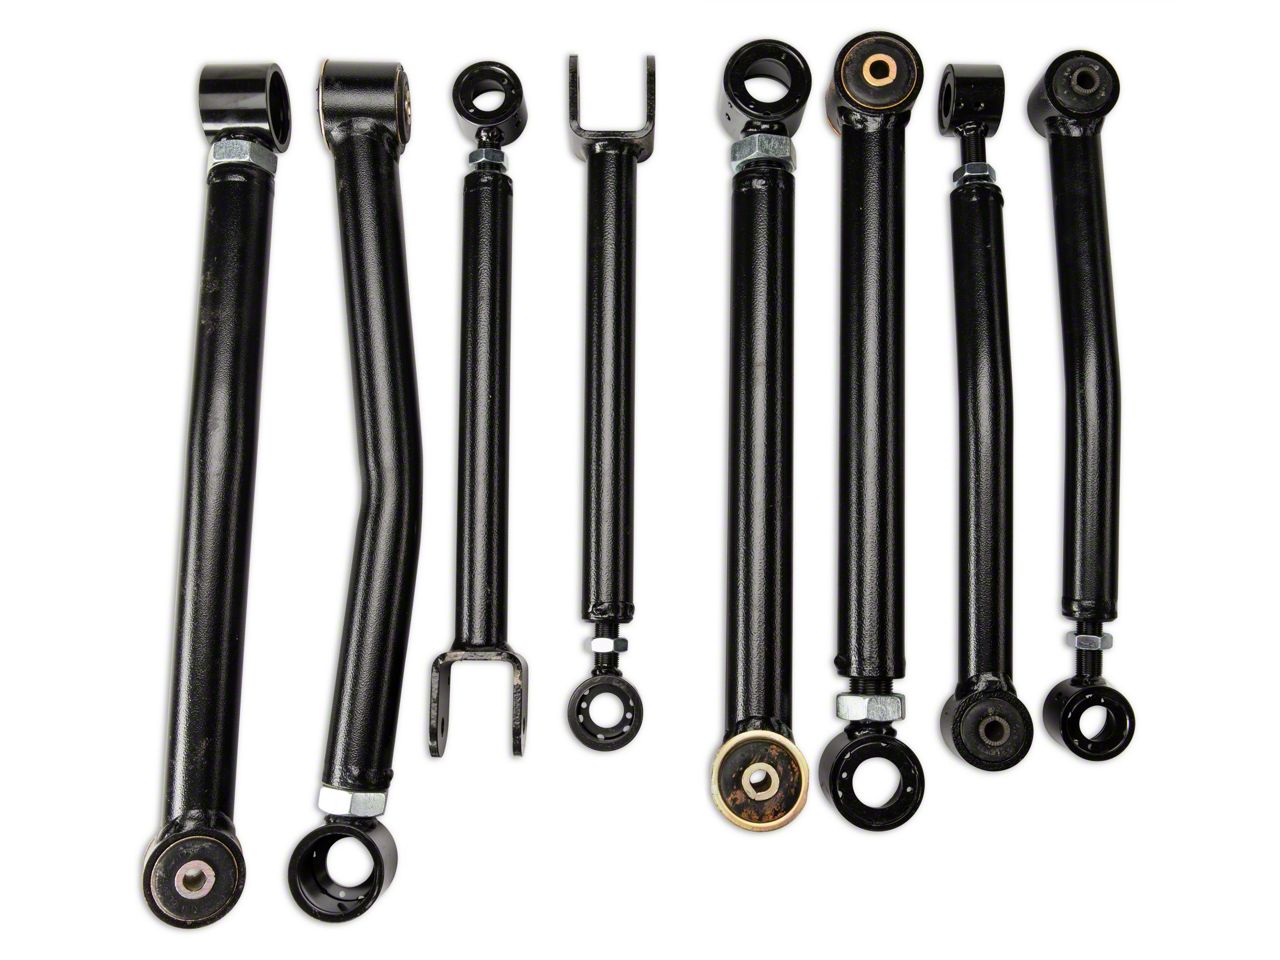 dynofit 0-6.5 Lift Front Upper Control Arms/A-arms/UCAS for 2007-2018 Wrangler JK JKU Left and Right Suspension Leveling Lift Kits for Rubicon Sahara Unlimited Moab and More 